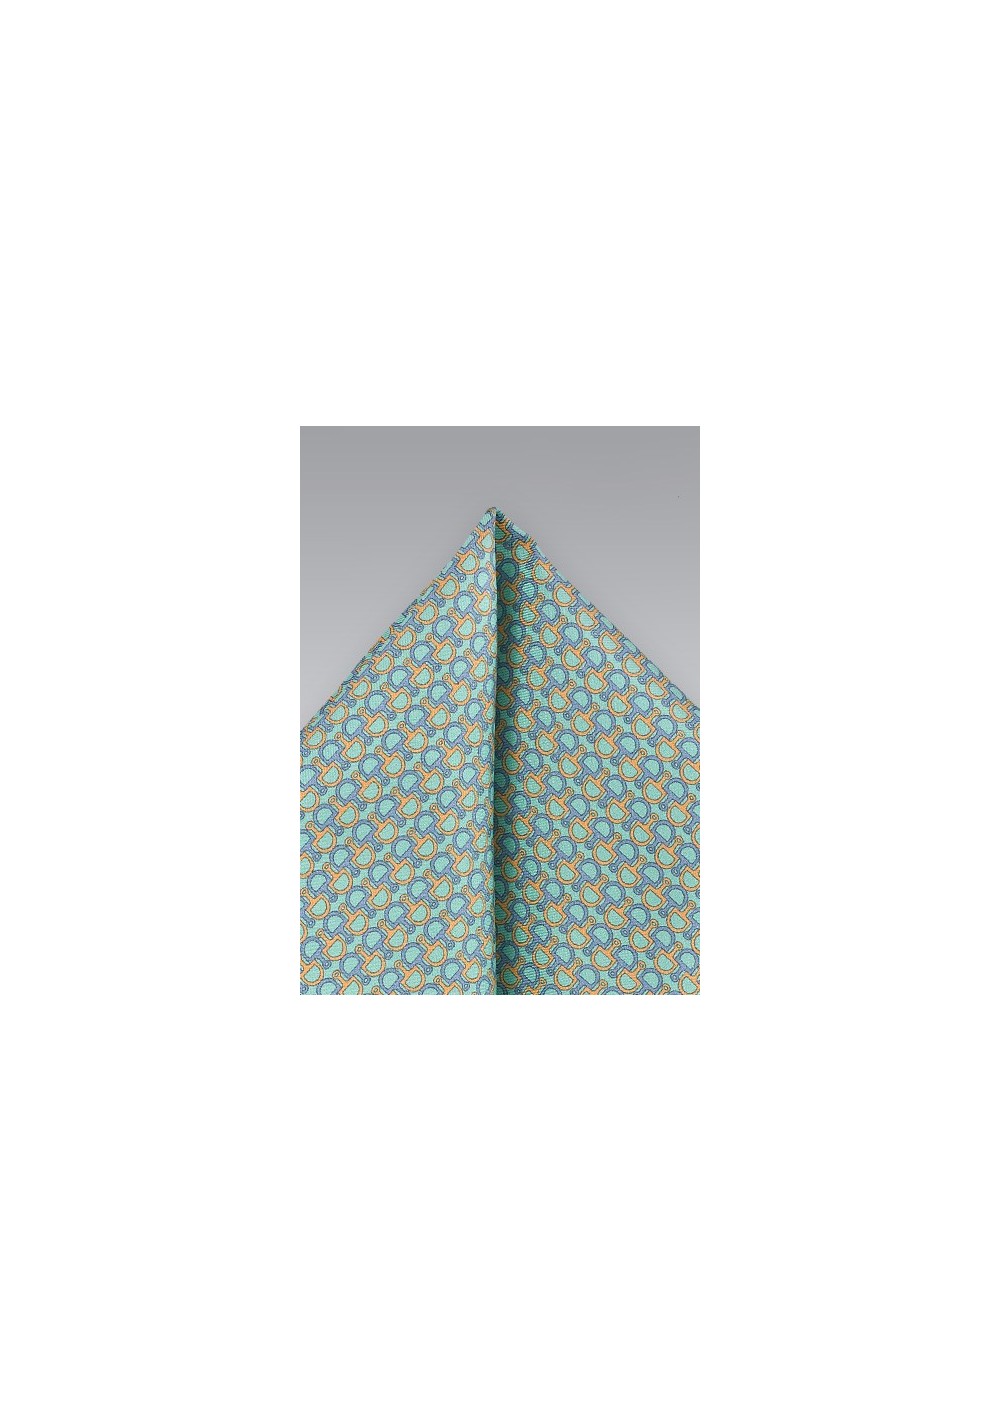 Charming Pocket Square in Aquas and Blues